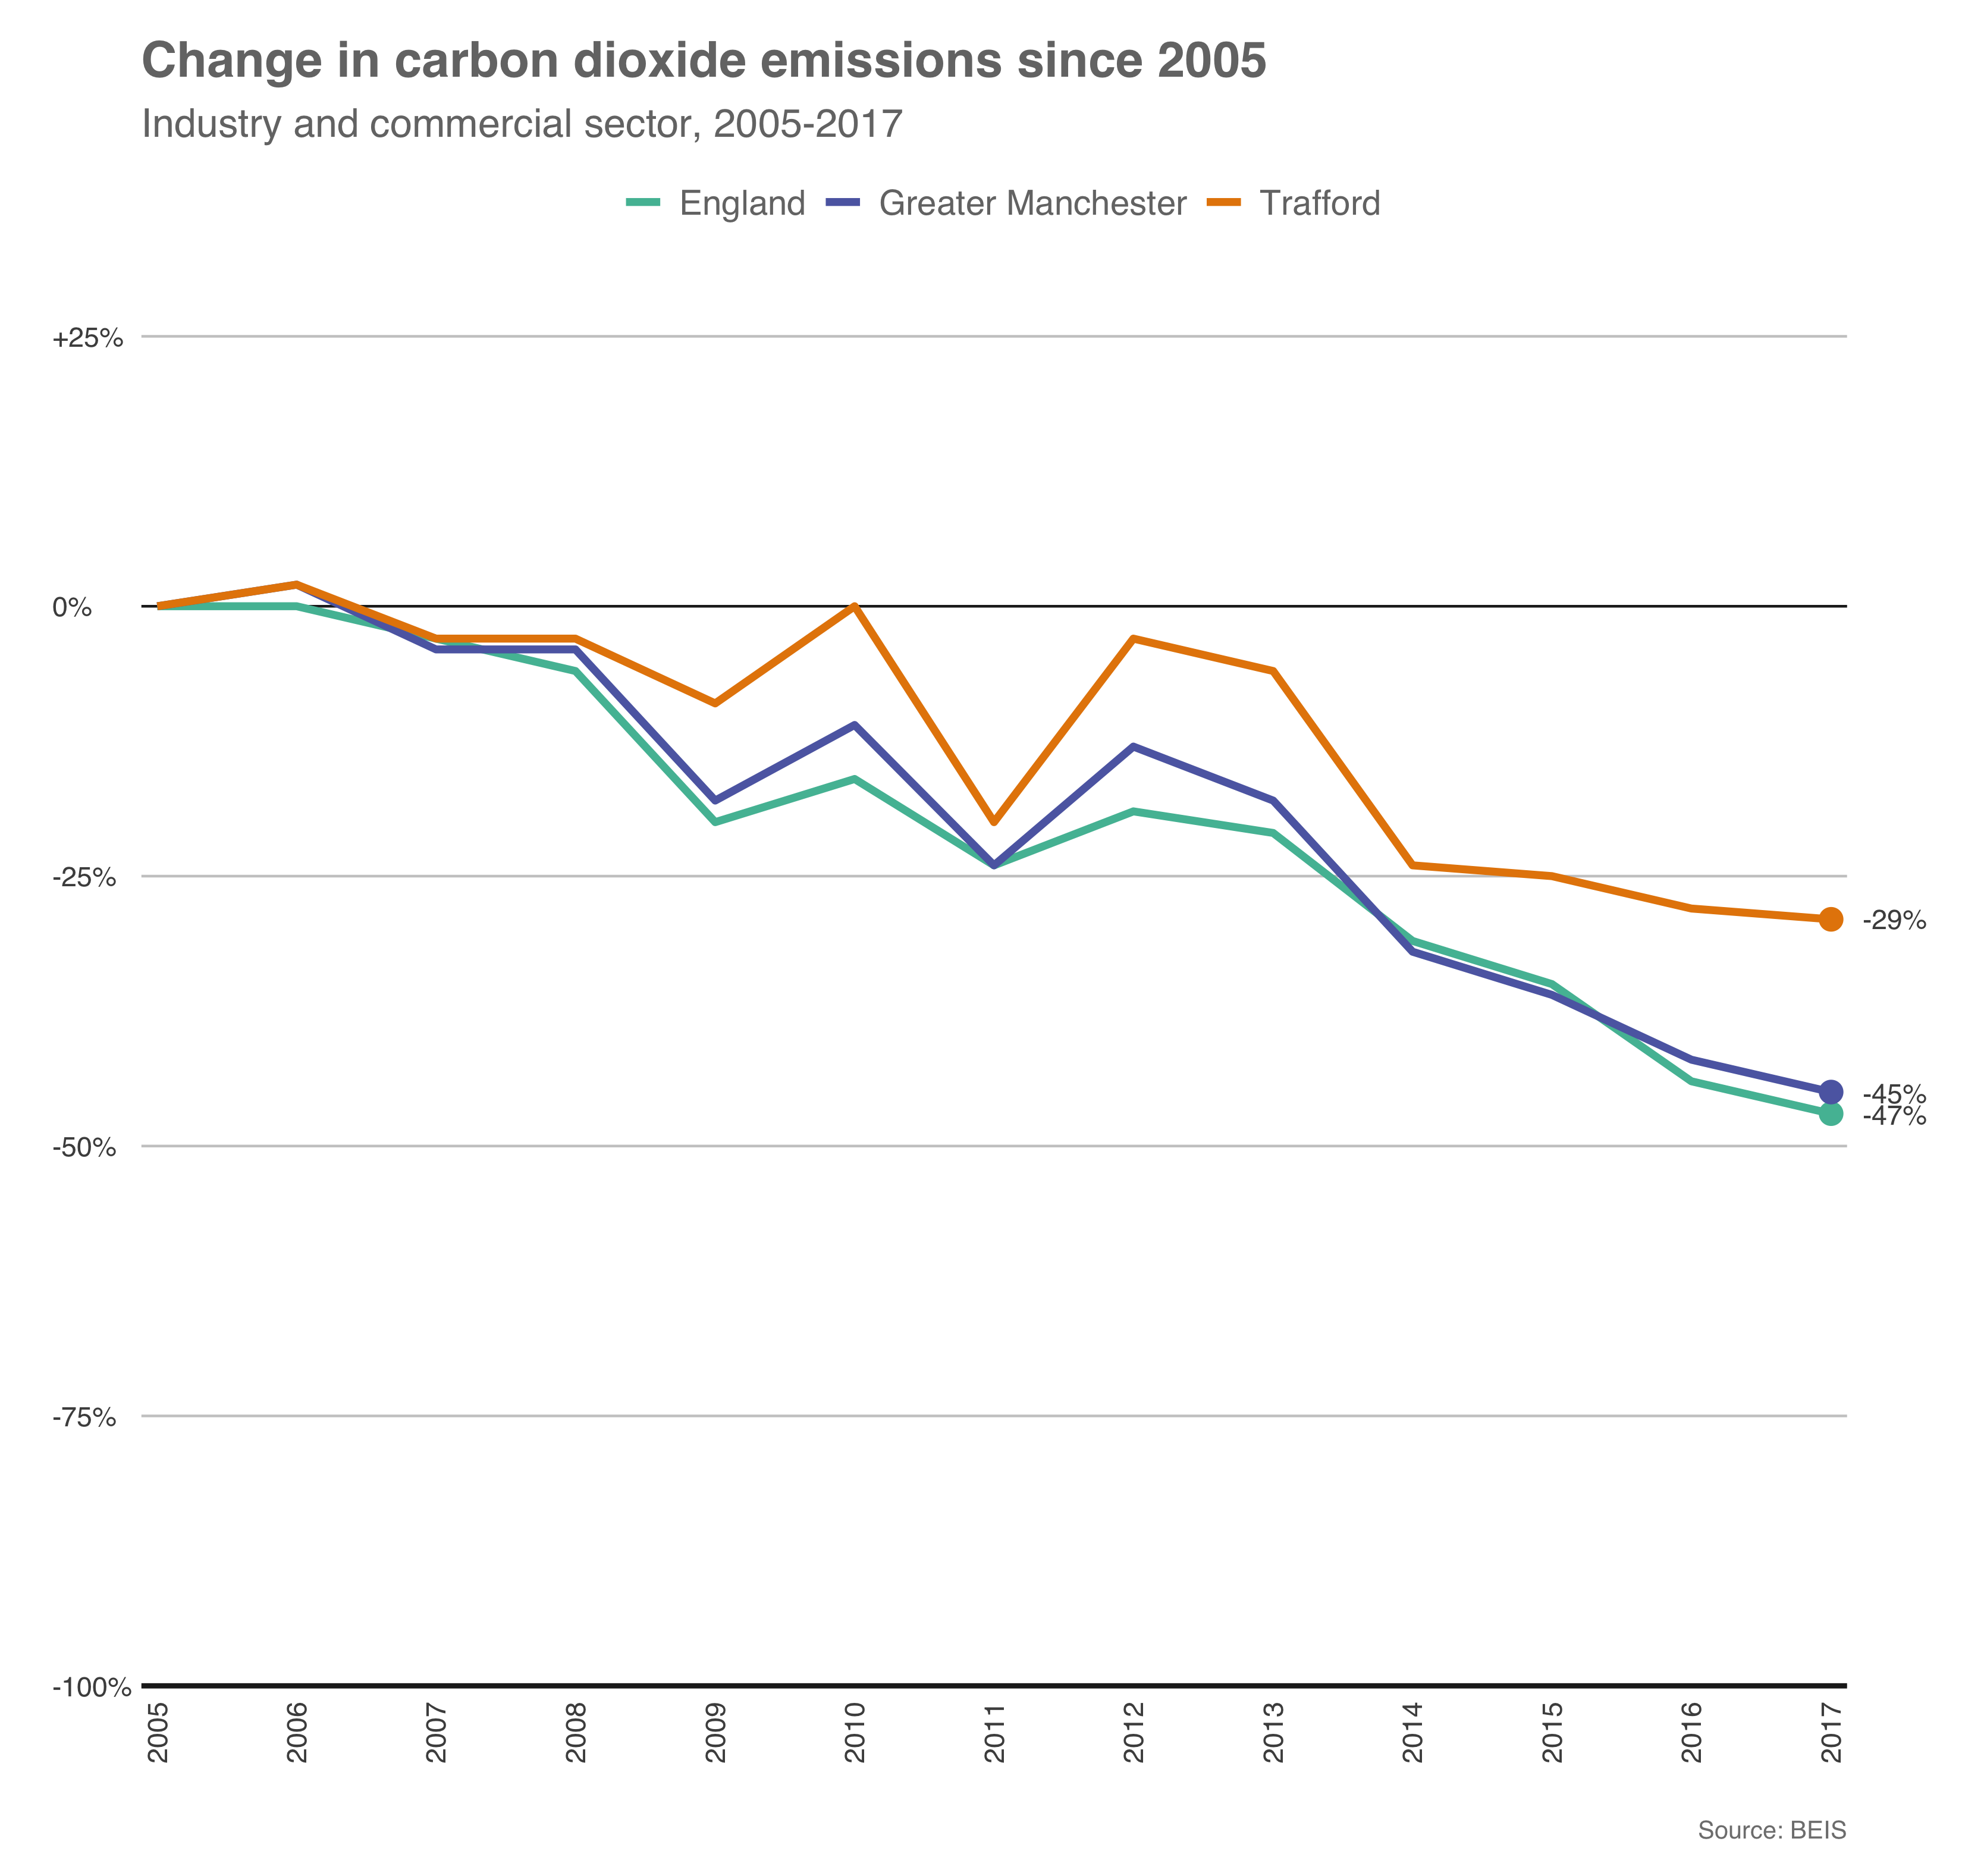 Change in carbon dioxide emissions in Trafford, Greater Manchester & England 2005-17.